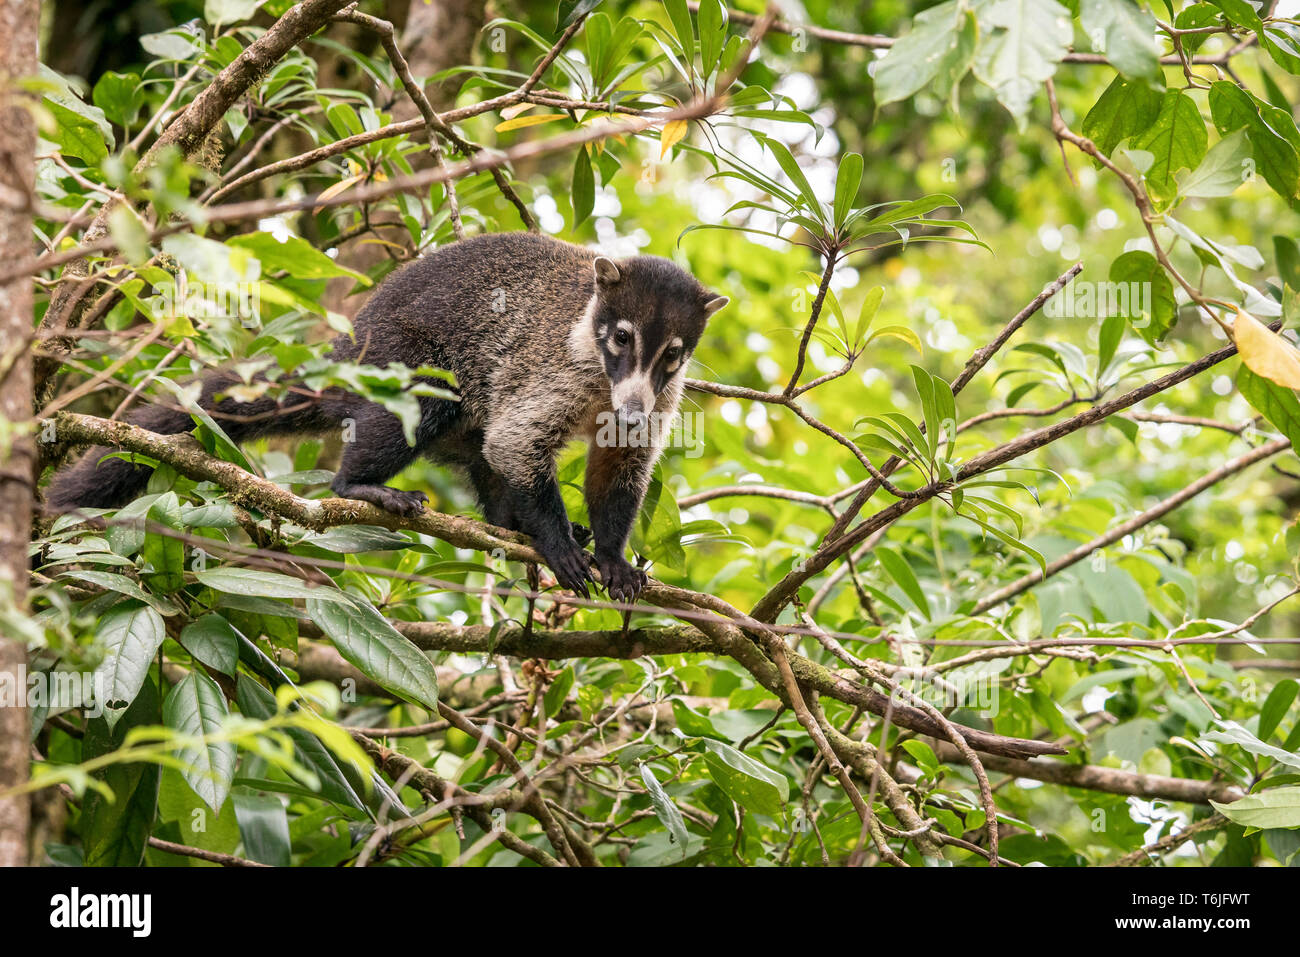 White-Nosed Coati, Monte Verde National Park, Costa Rica Banque D'Images